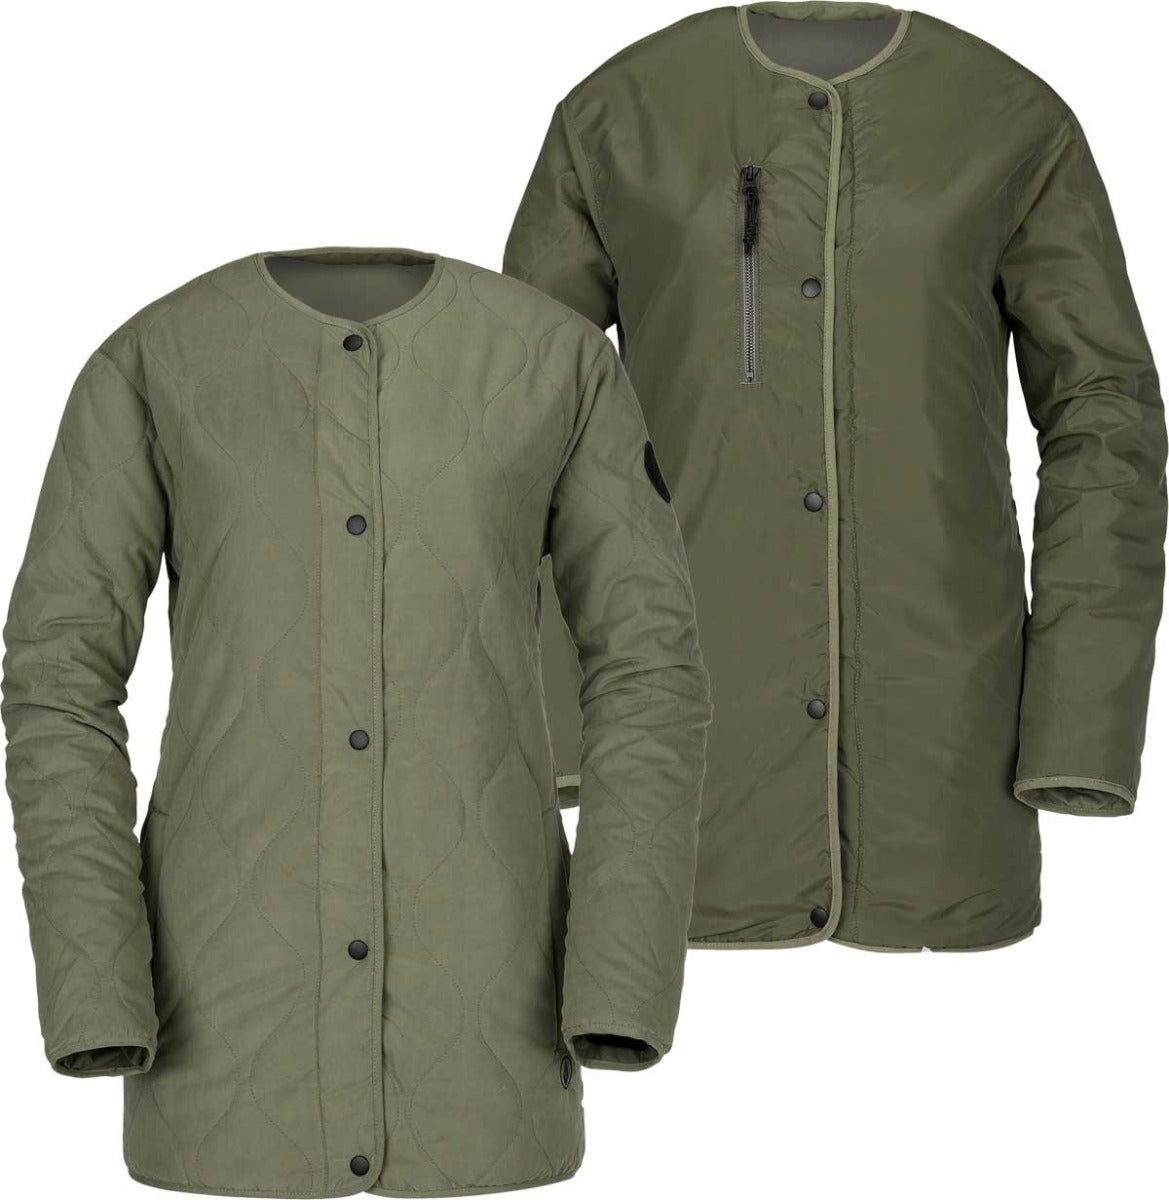 Volcom Jacket Liner Insulated - Military - S